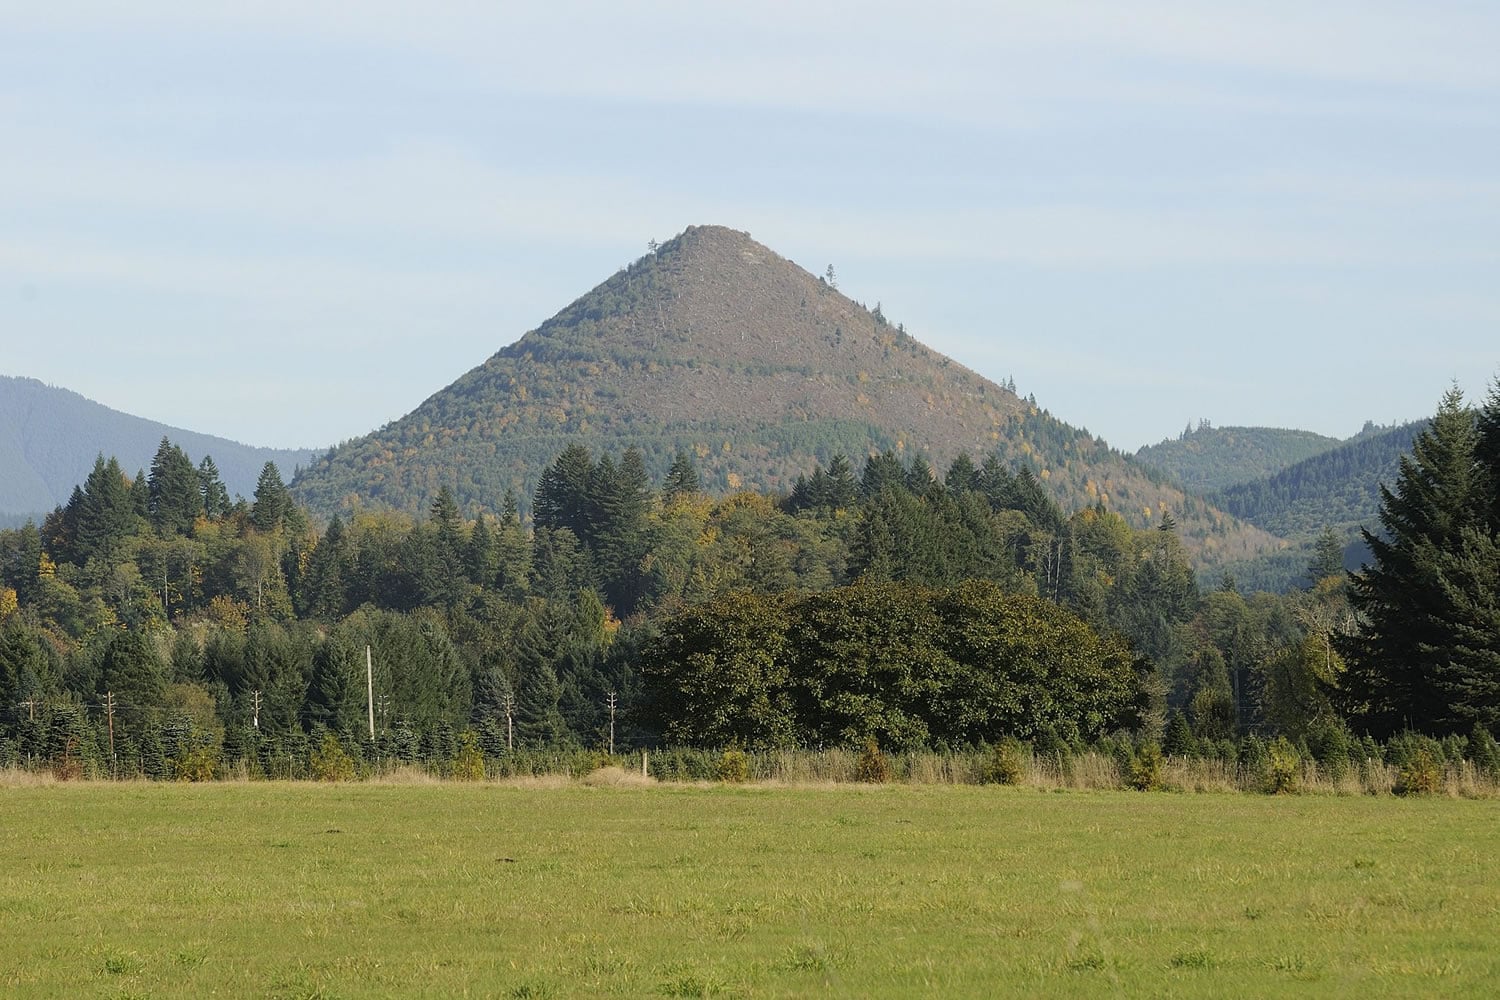 Clark County's cone-shaped Tumtum Mountain is still for sale, according to Terri Eklund, a Vancouver real estate agent who is listing the site.